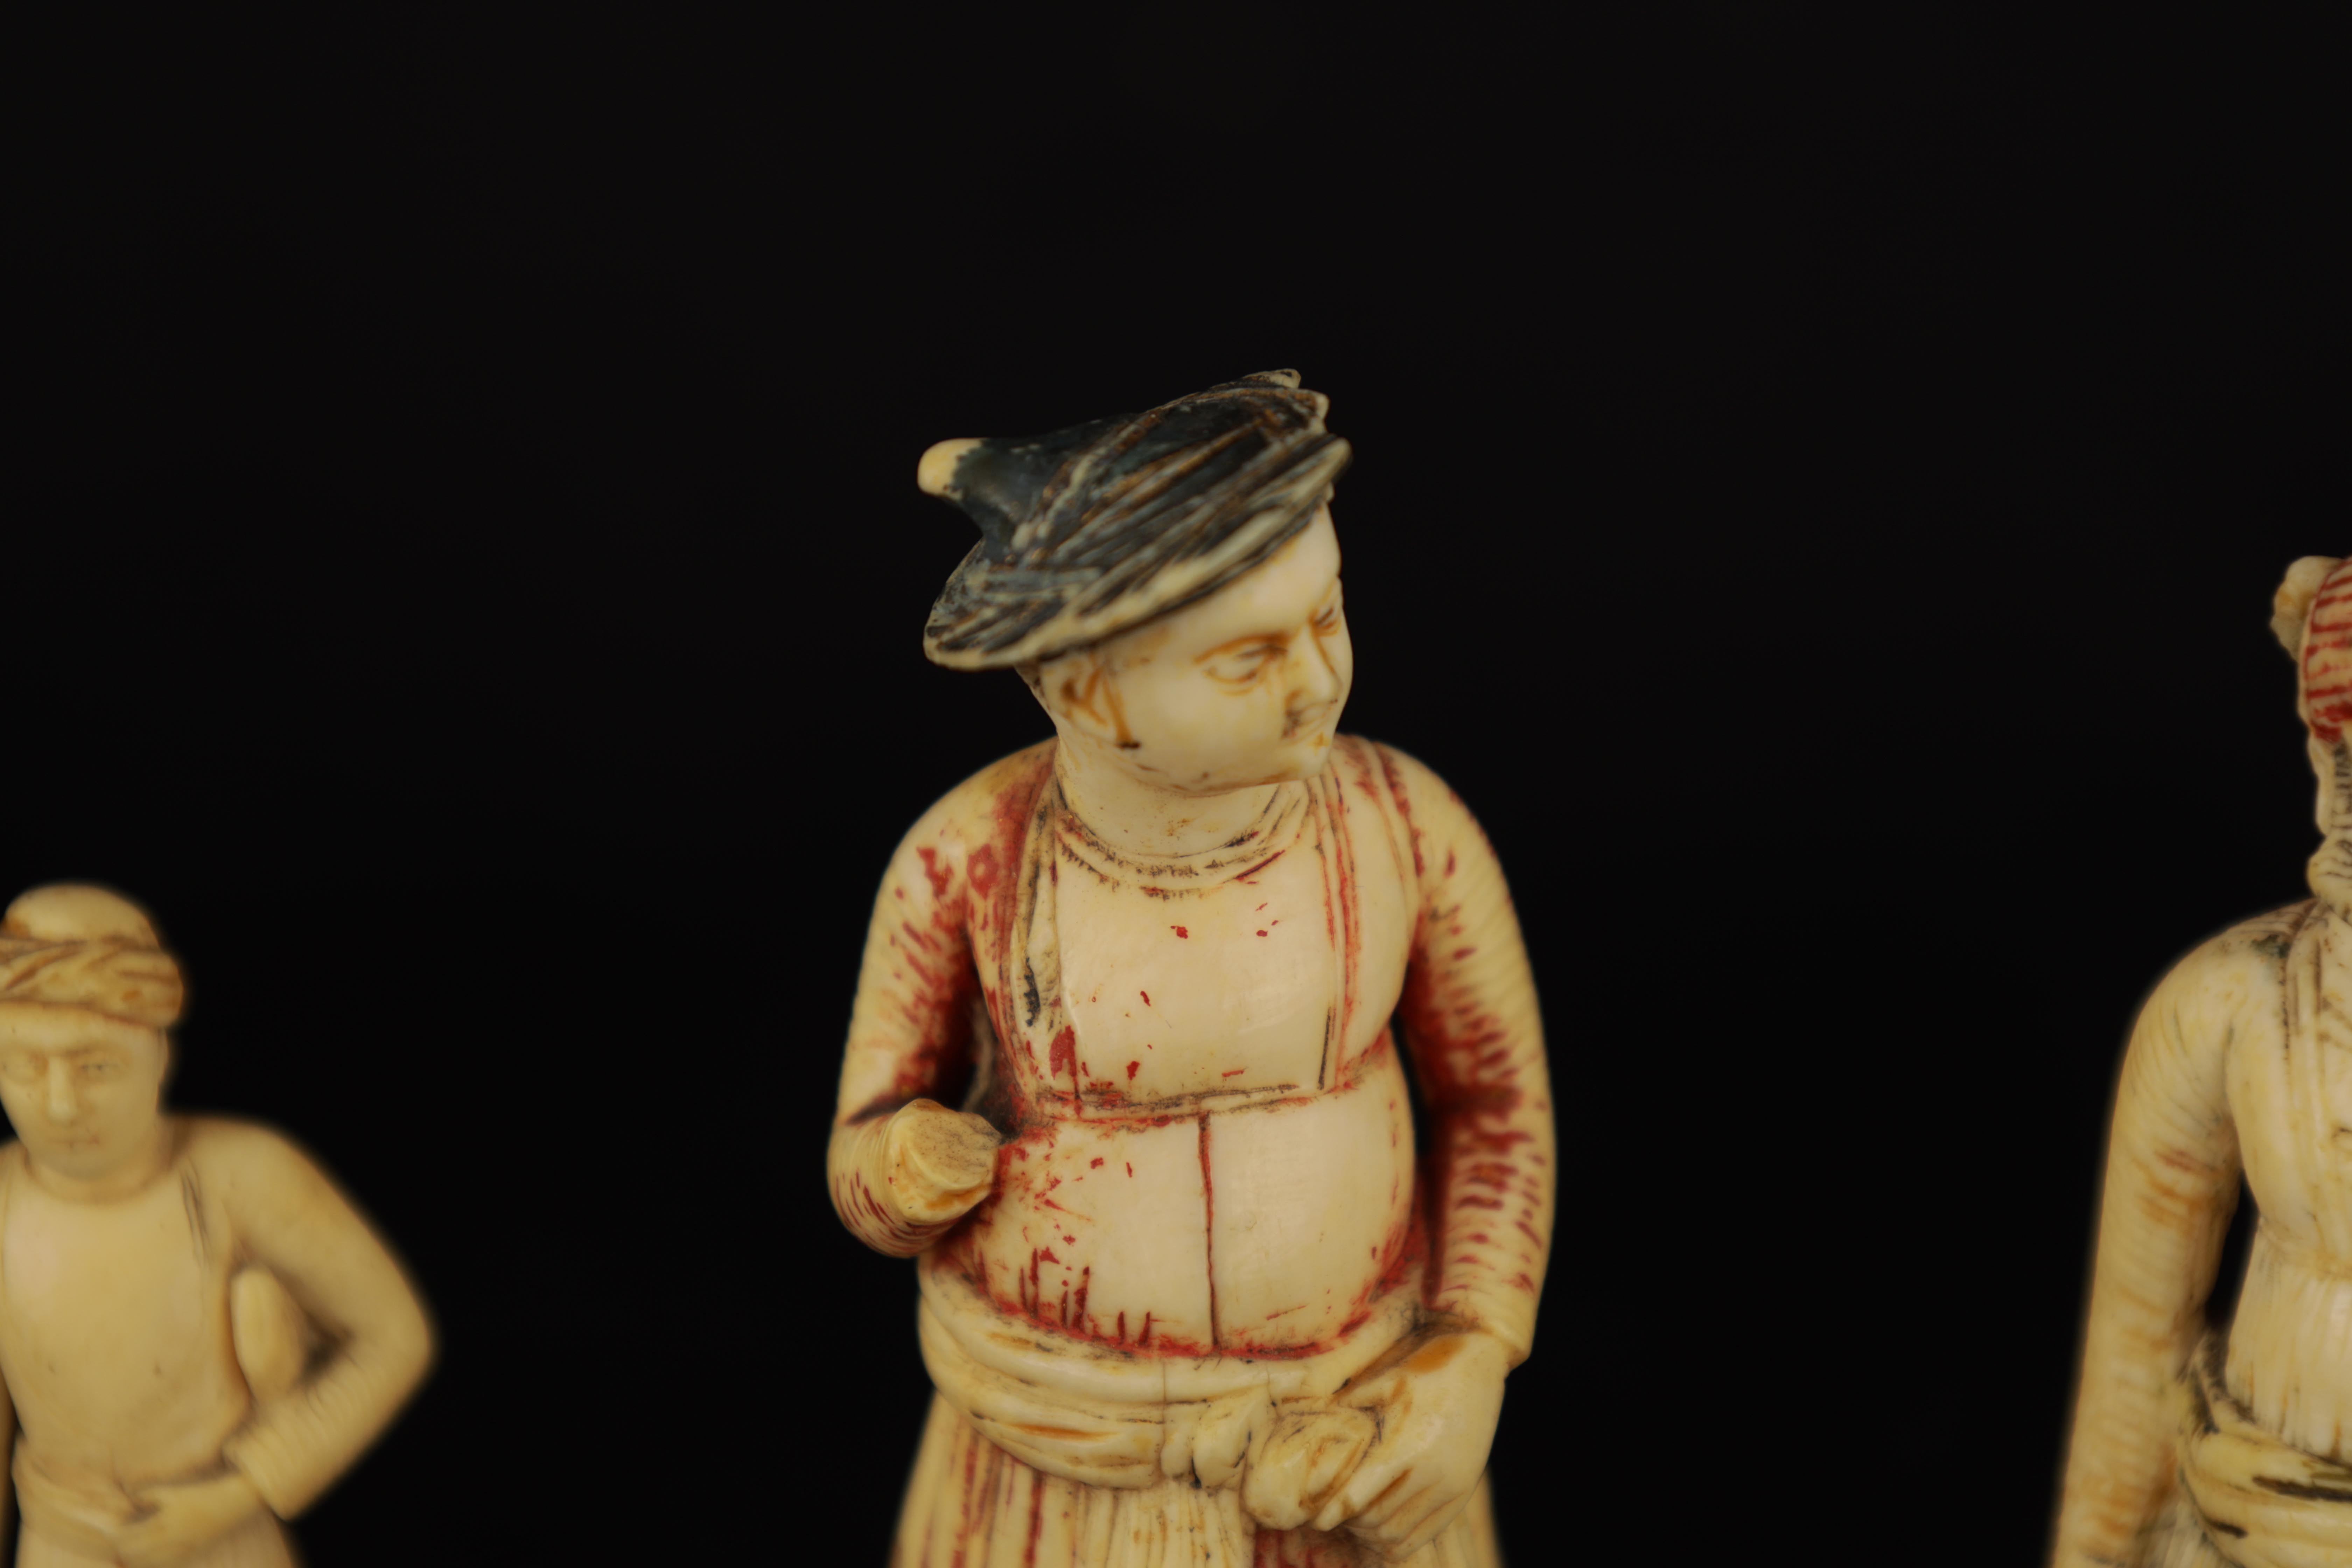 FIVE 19TH CENTURY INDIAN IVORY CHESS PIECES depicting finely carved figures in ceremonial dress - Image 2 of 7